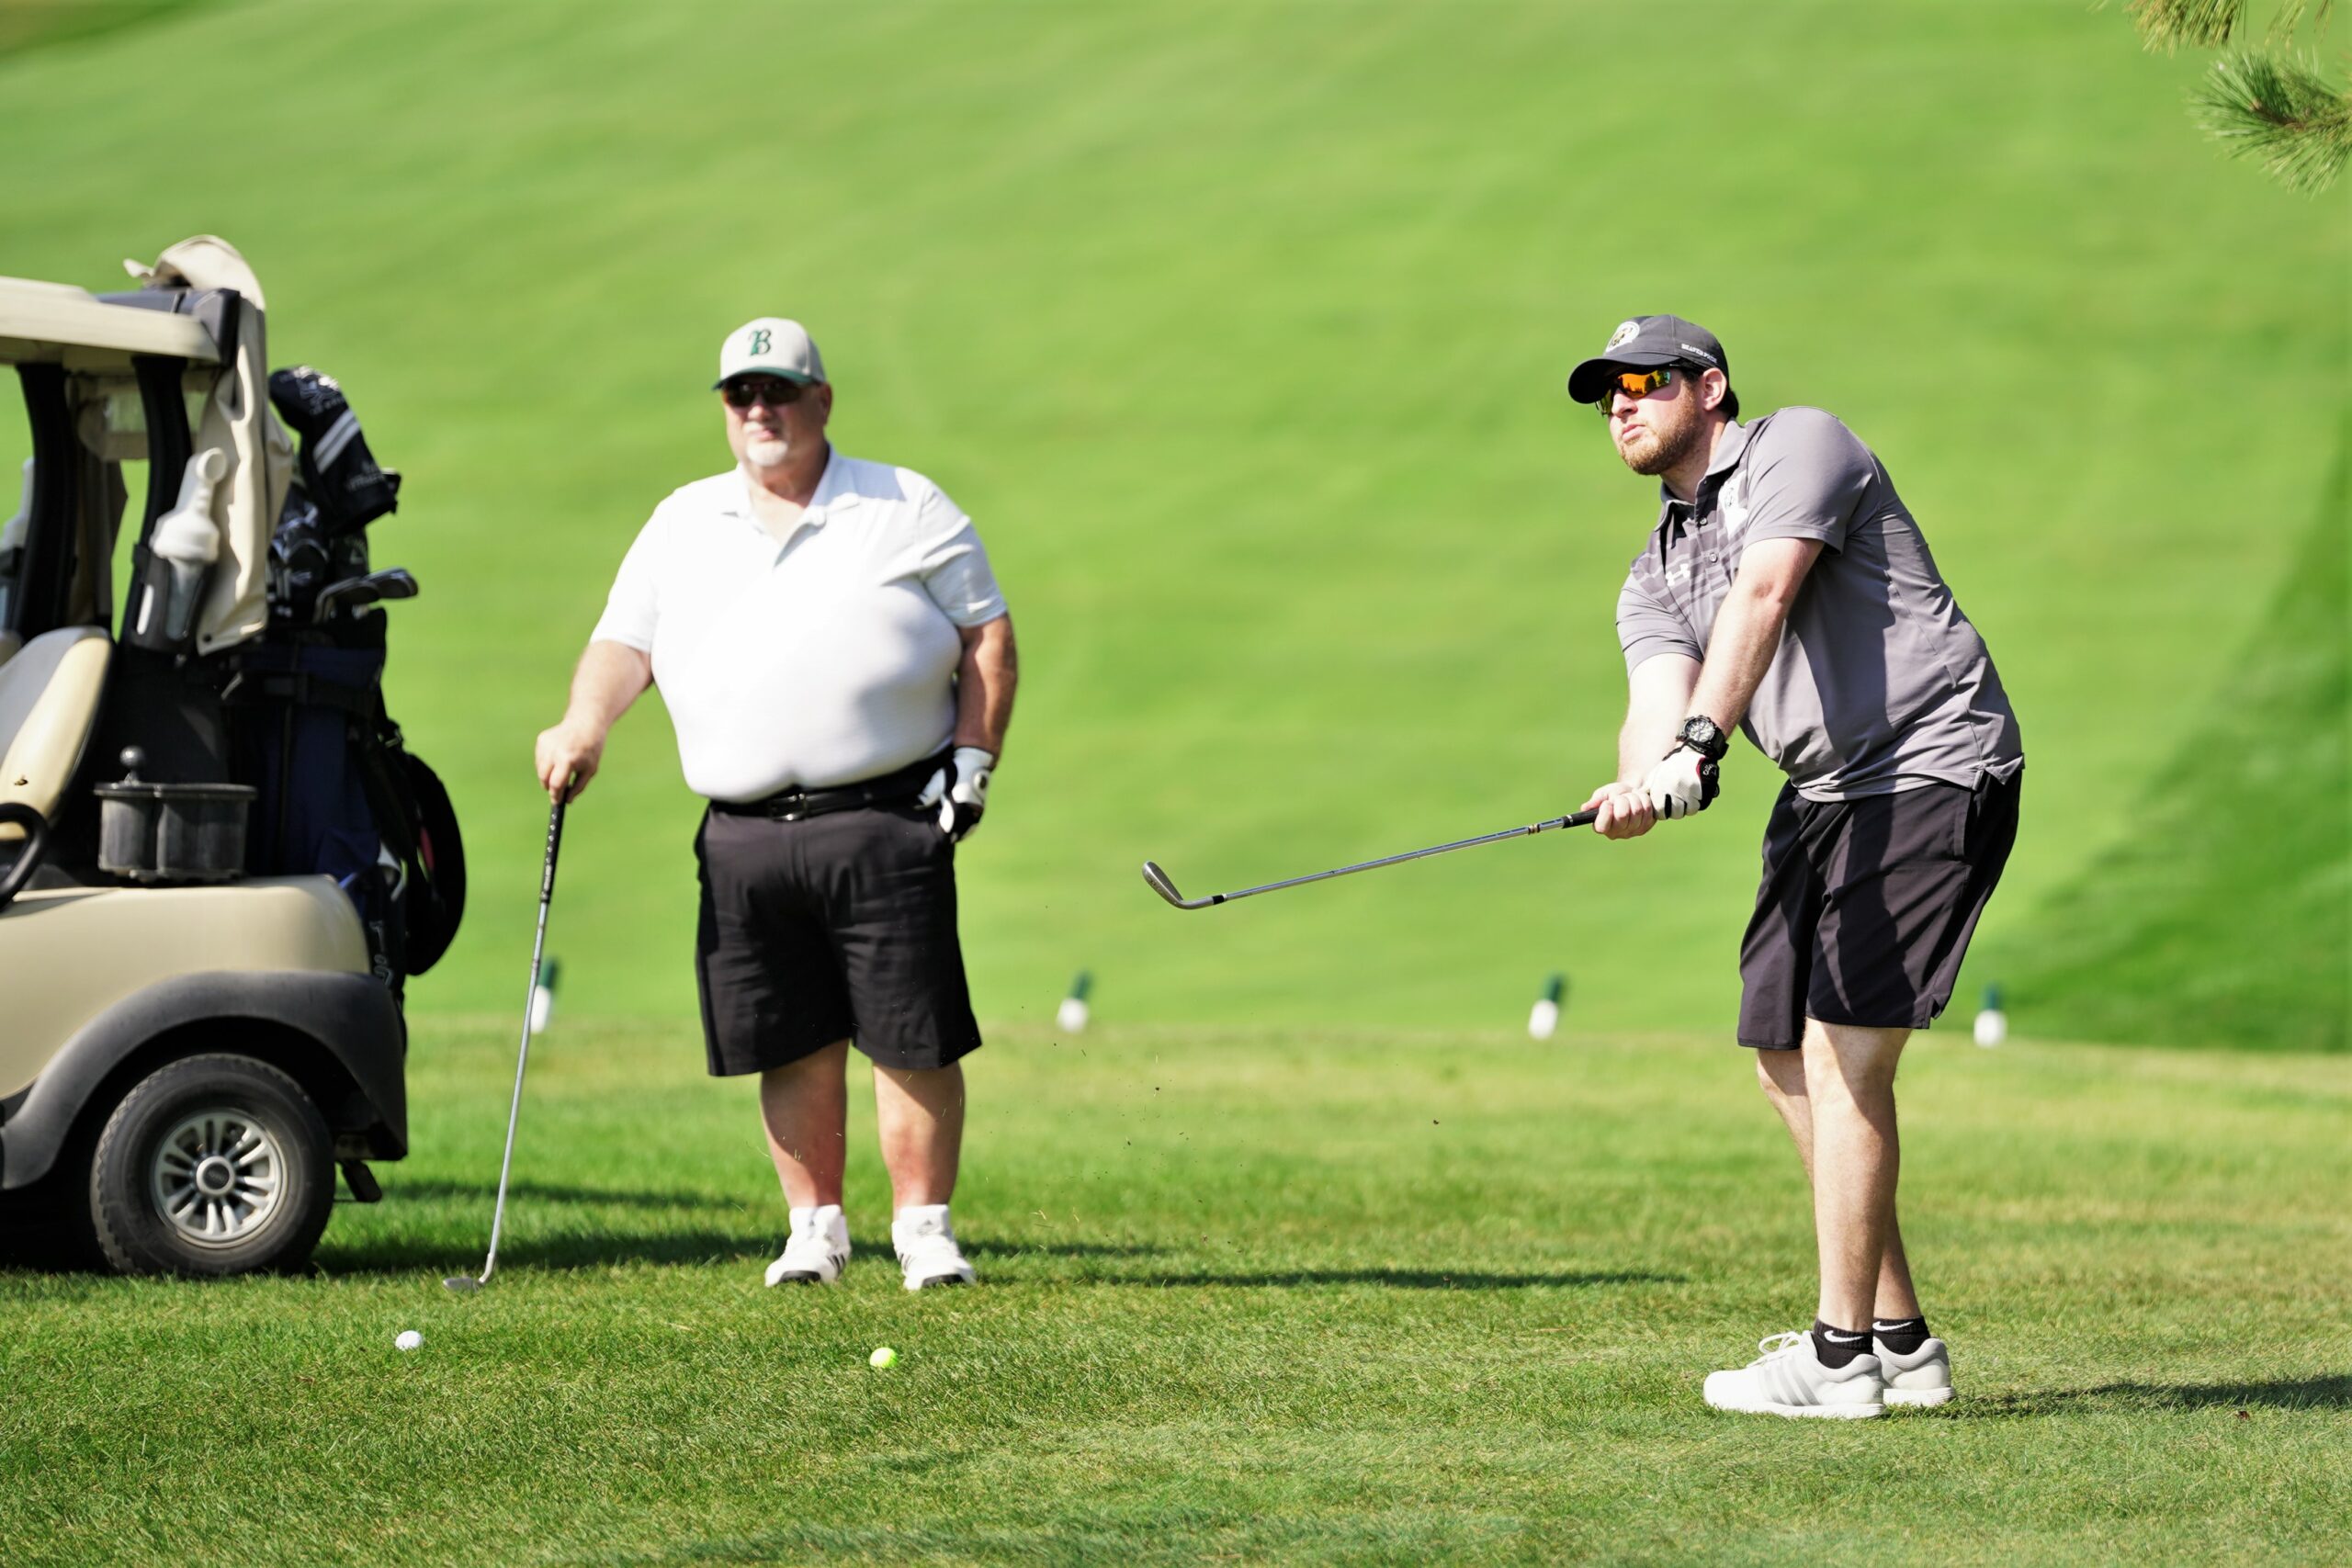 Jesse Katz, the Bemidji State Alumni & Foundation's director of annual giving for athletics, chips onto the first green during the Howe-Welle Women's Athletics Golf Tournament on Friday, Aug. 25, 2023, at the Bemidji Town and Country Club. (Micah Friez / Bemidji State)